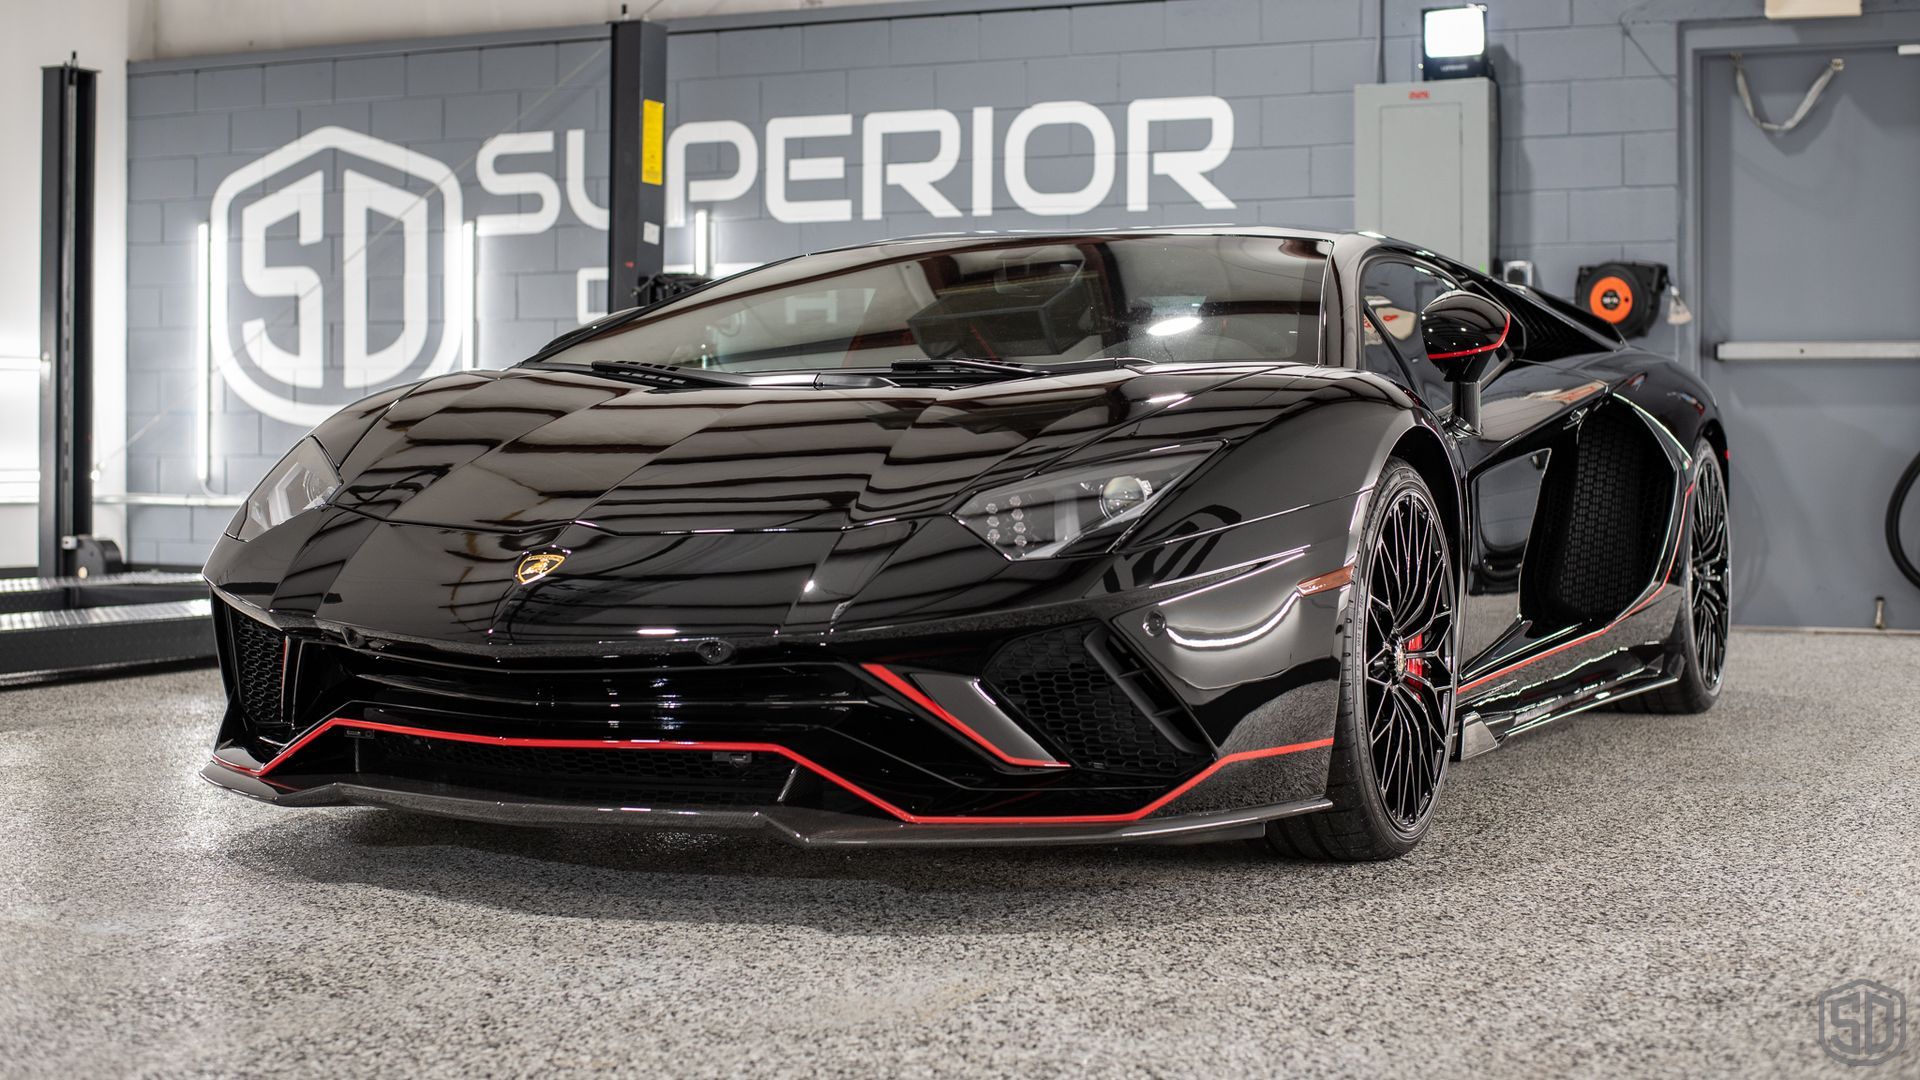 2022 Lamborghini Aventador Ultimae Detailing, Paint Correction, Engine and Interior Detailing, Paint Protection Film, Modesta Wheel and Glass Coating, Full Exterior Glass Protection front end view Orlando USA